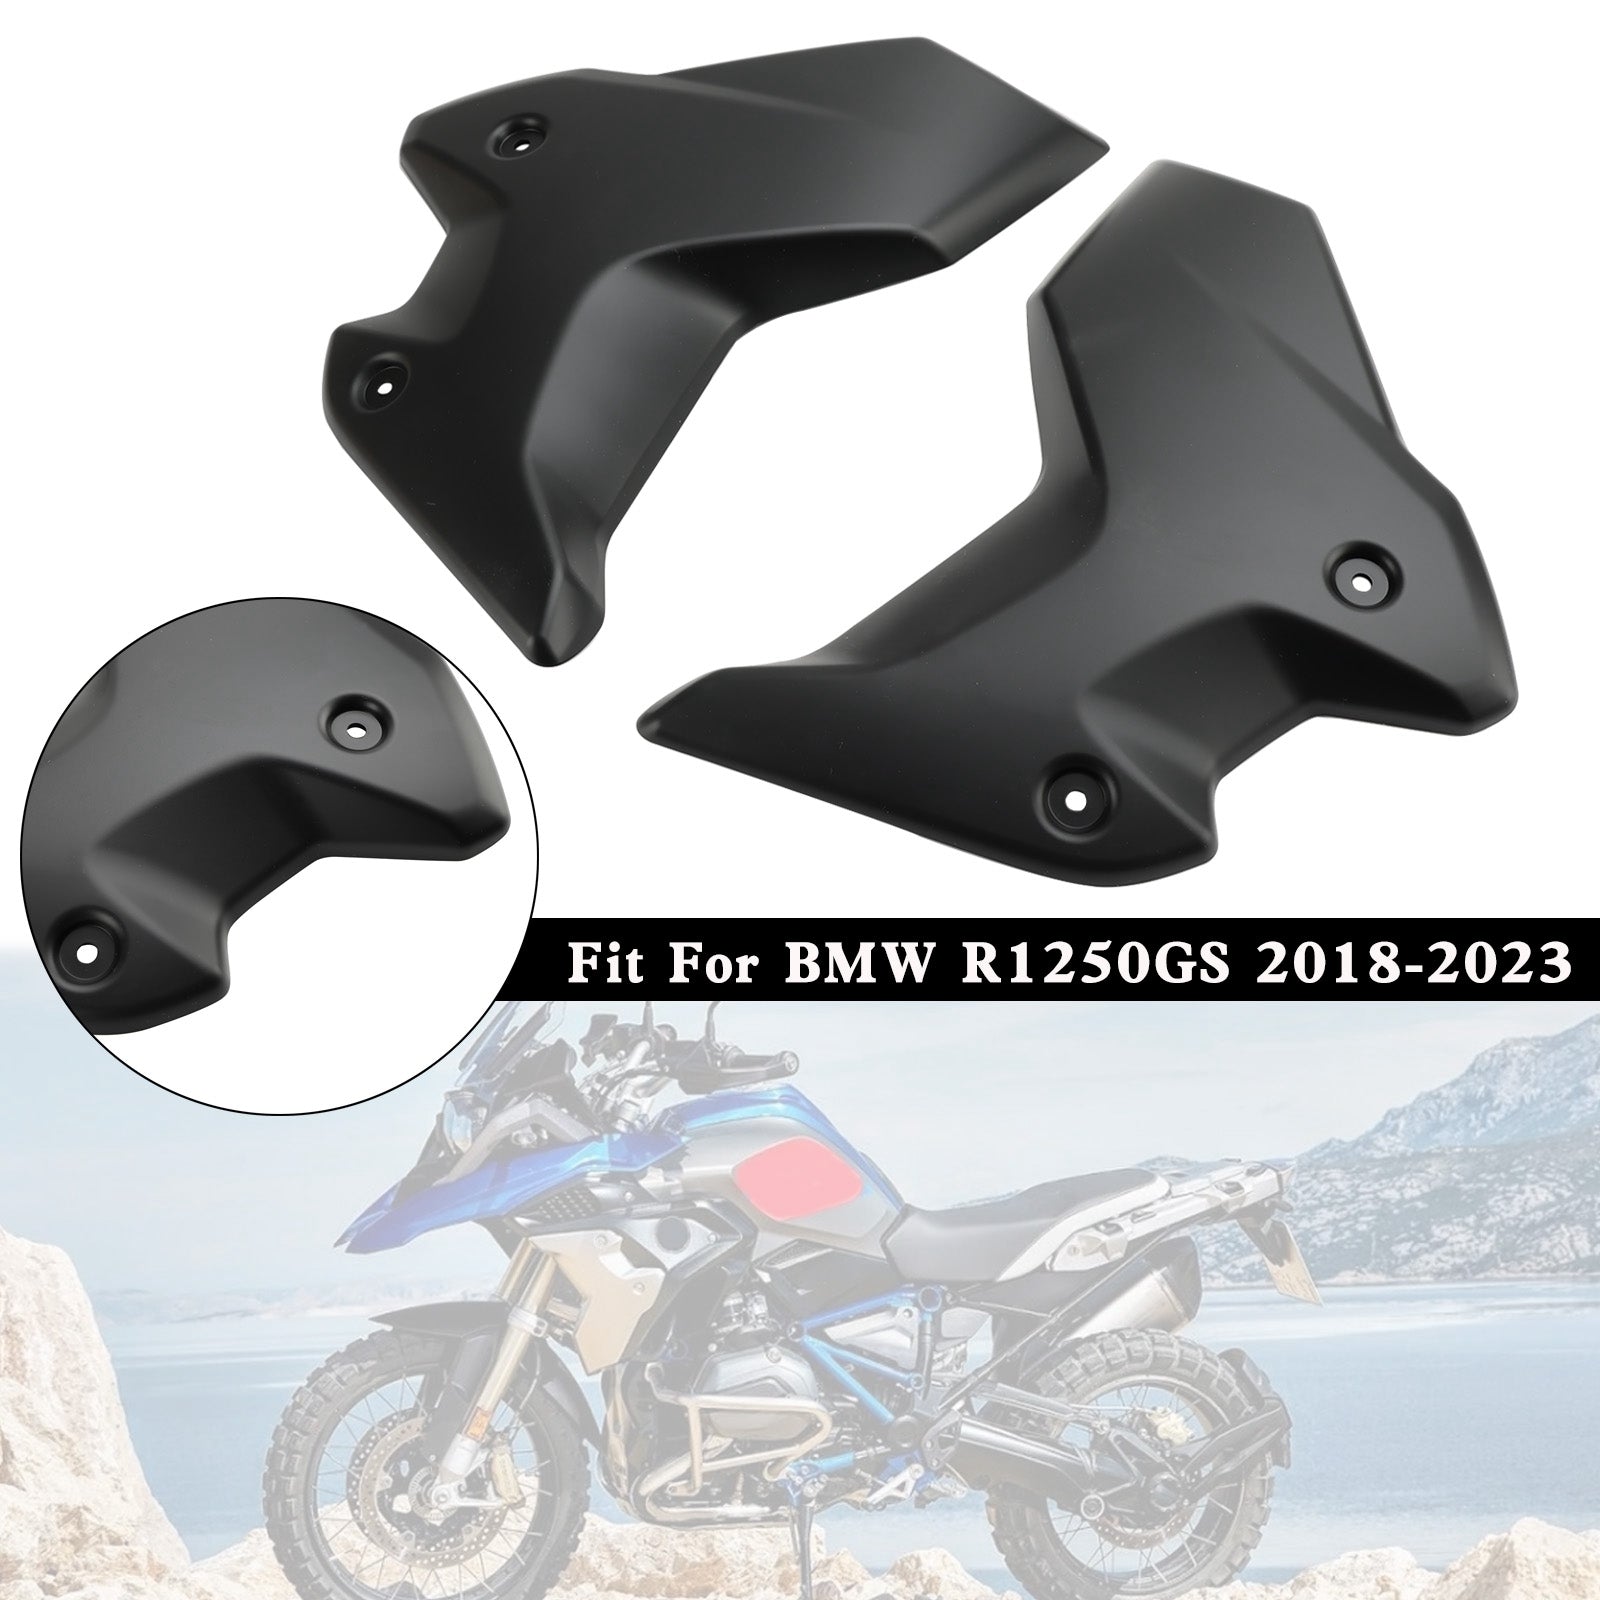 18-23 BMW R1250GS Side Frame Fairing Cowl Guards Radiator Cover